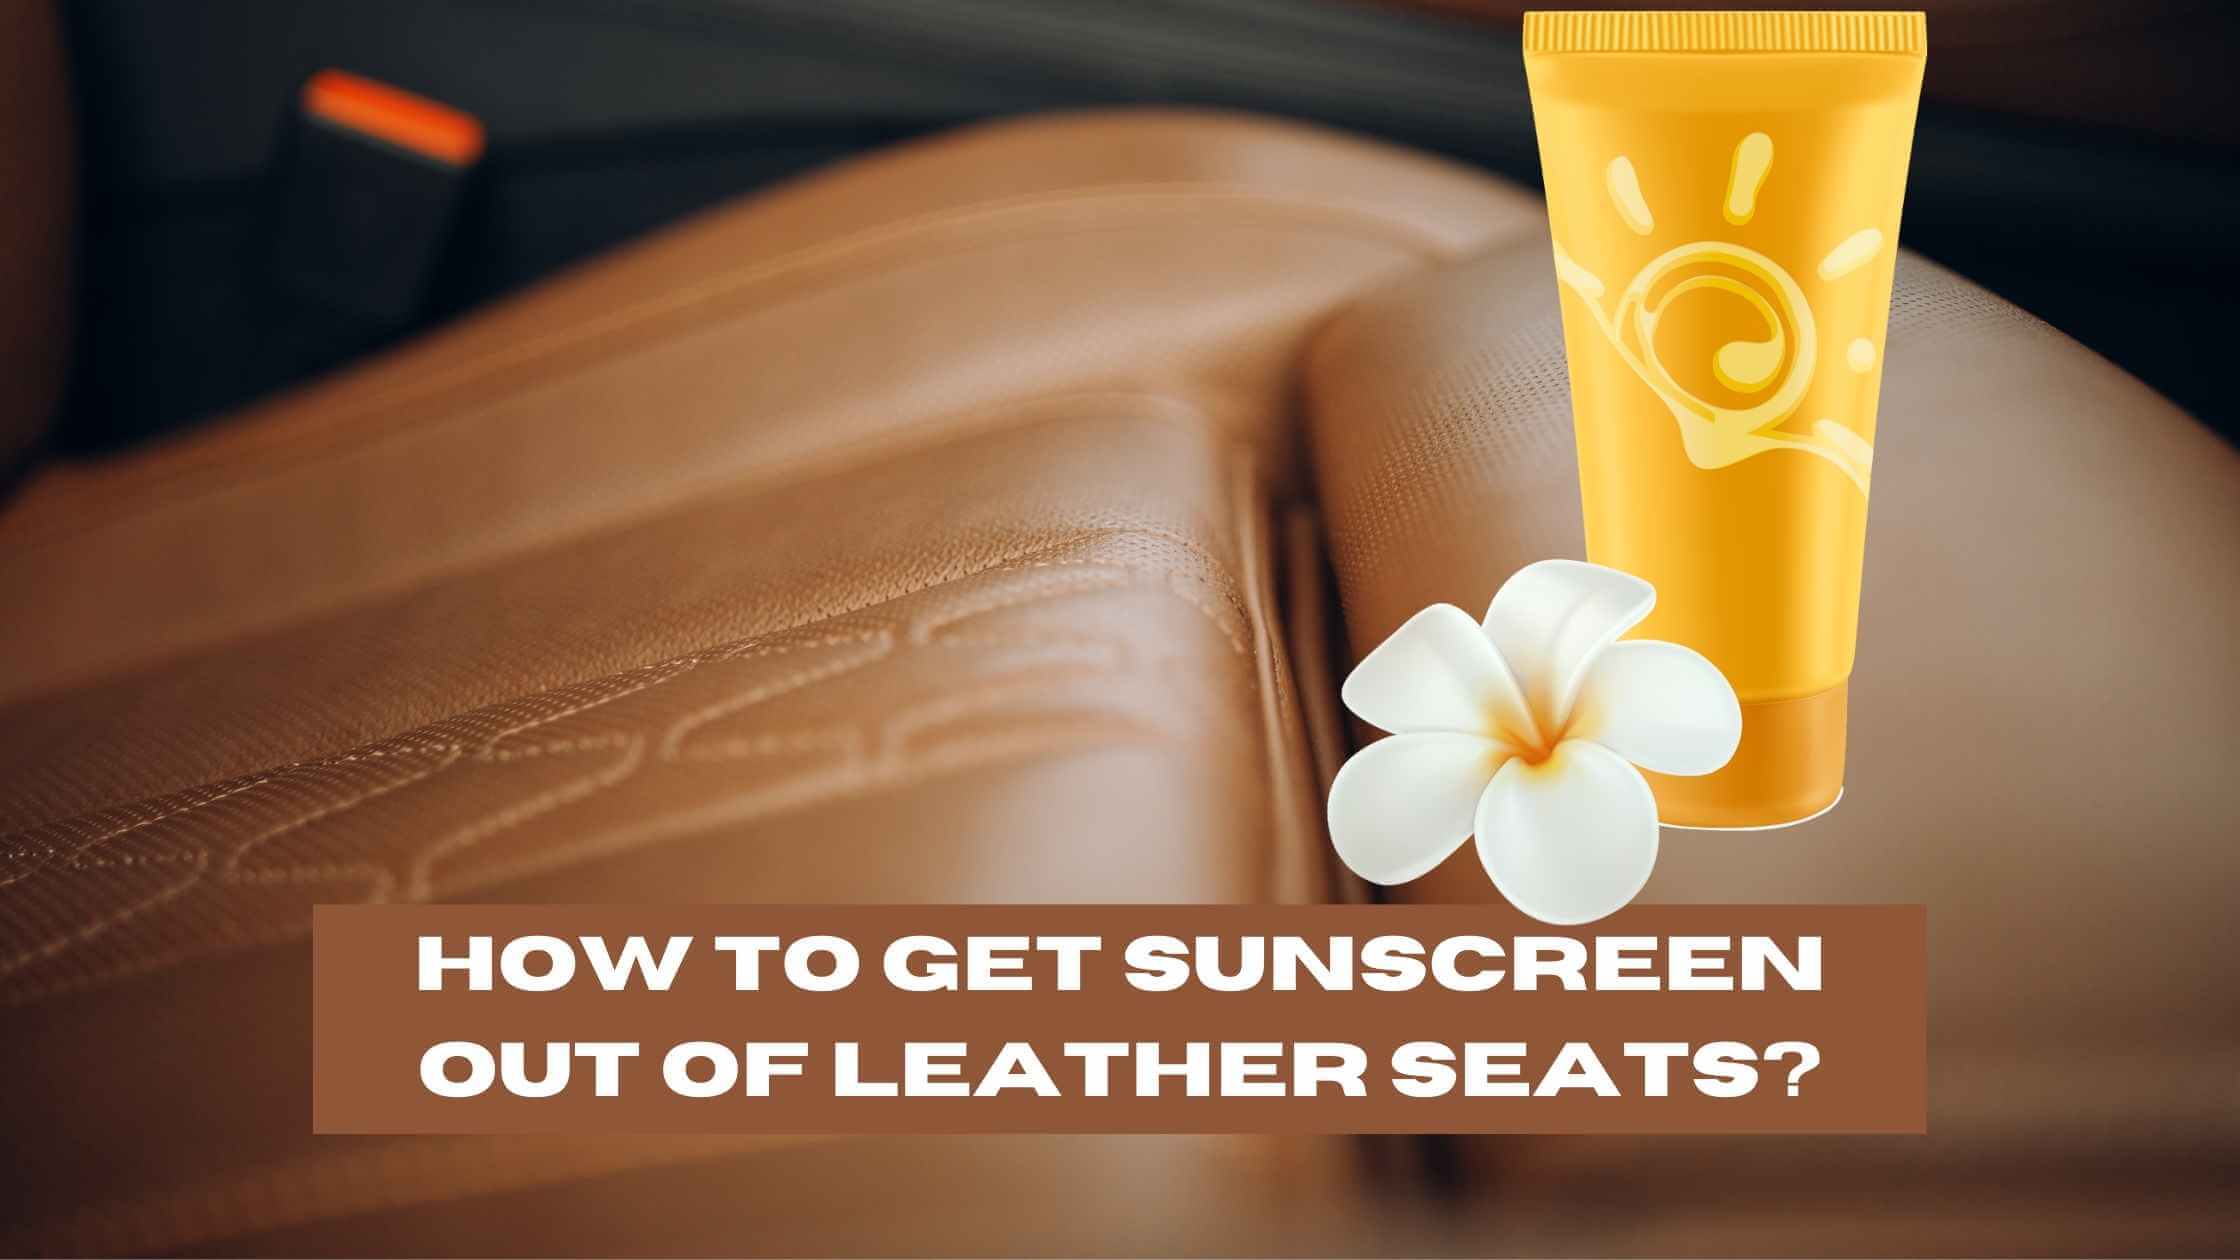 How to Get Sunscreen Out of Leather Seats